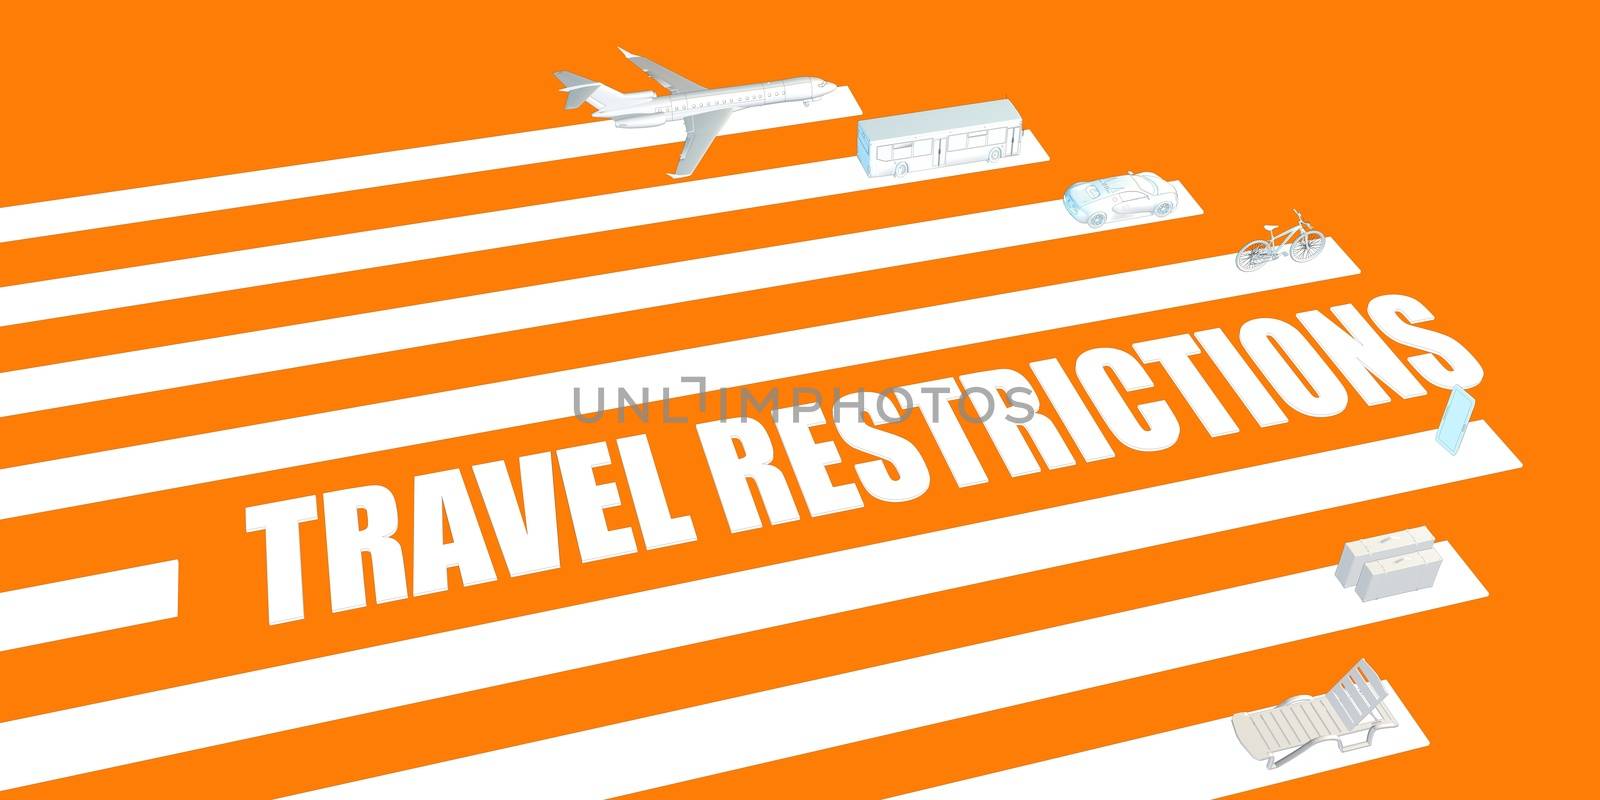 Travel Restrictions by kentoh